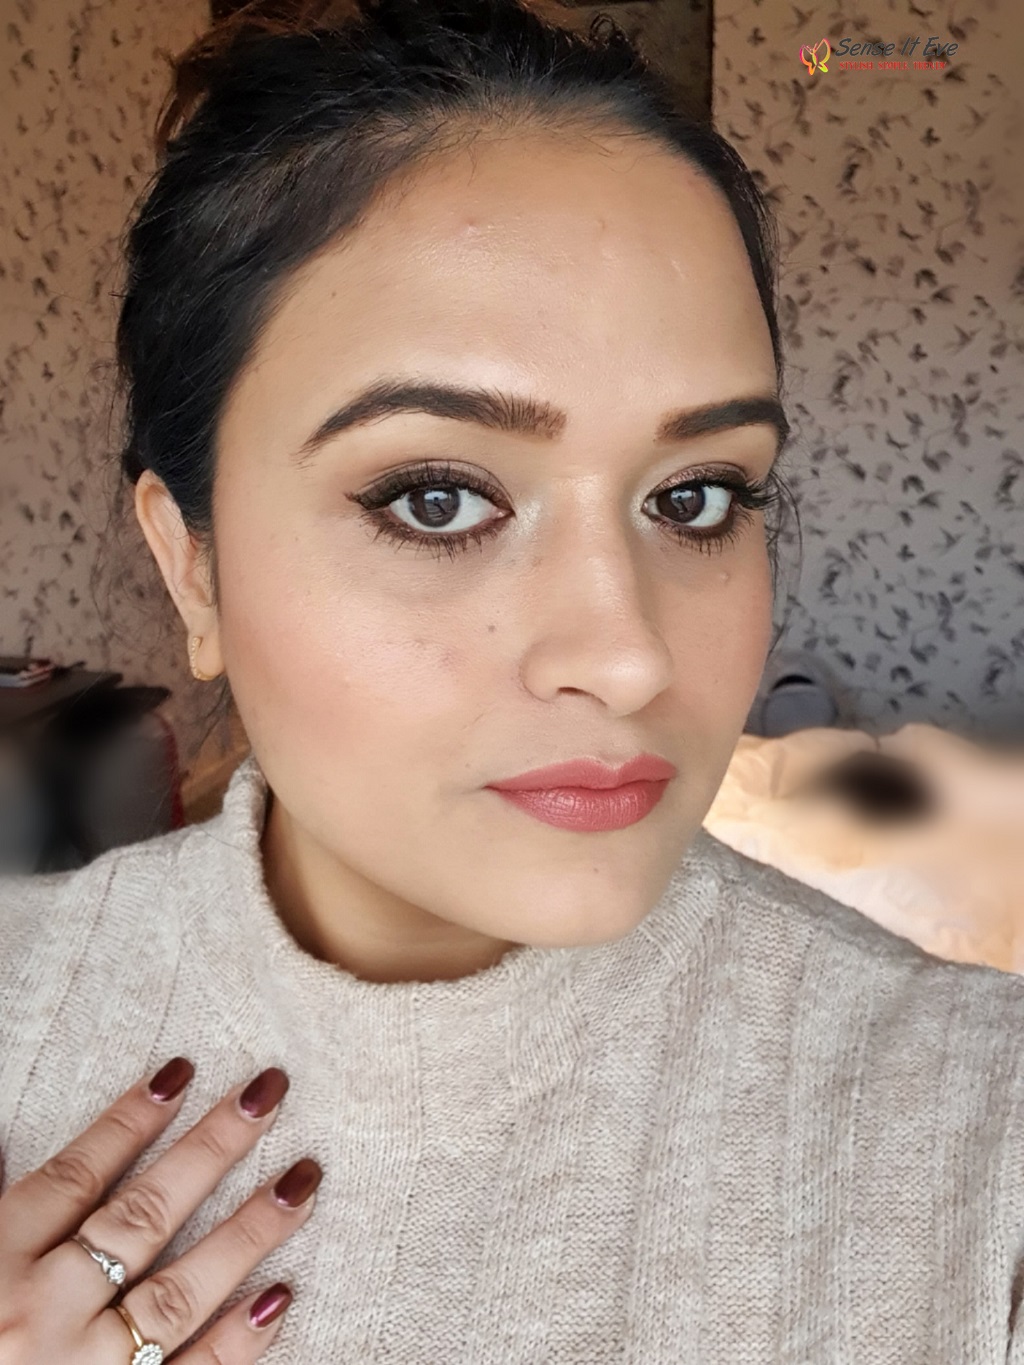 Lakme Absolute Shine Line Liquid Liner Brown Shimmer Review Swatches Sense It Eve Lakme Absolute Shine Line Eye Liners : Review & Swatches